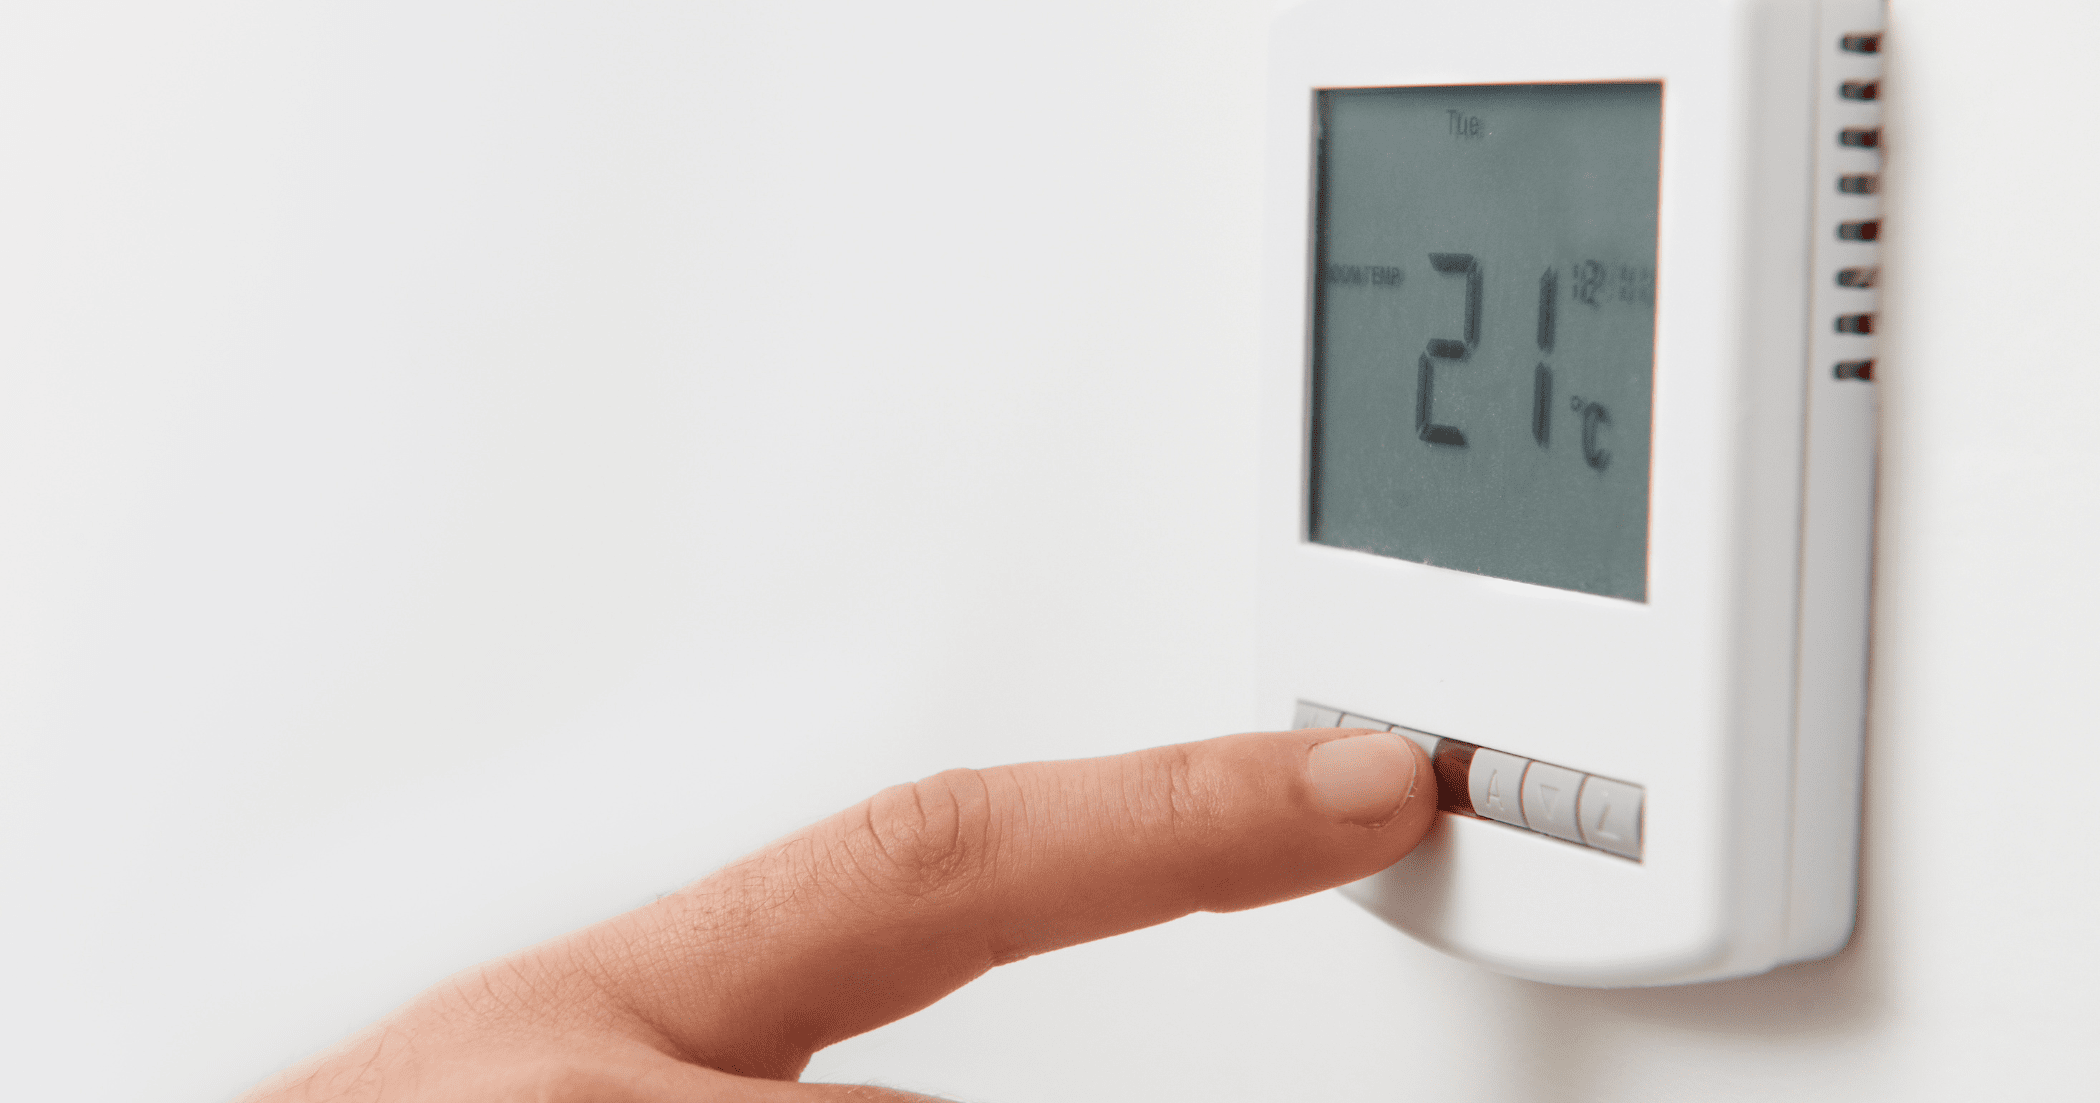 A stock image of a thermostat - start your property search on Share to Buy!